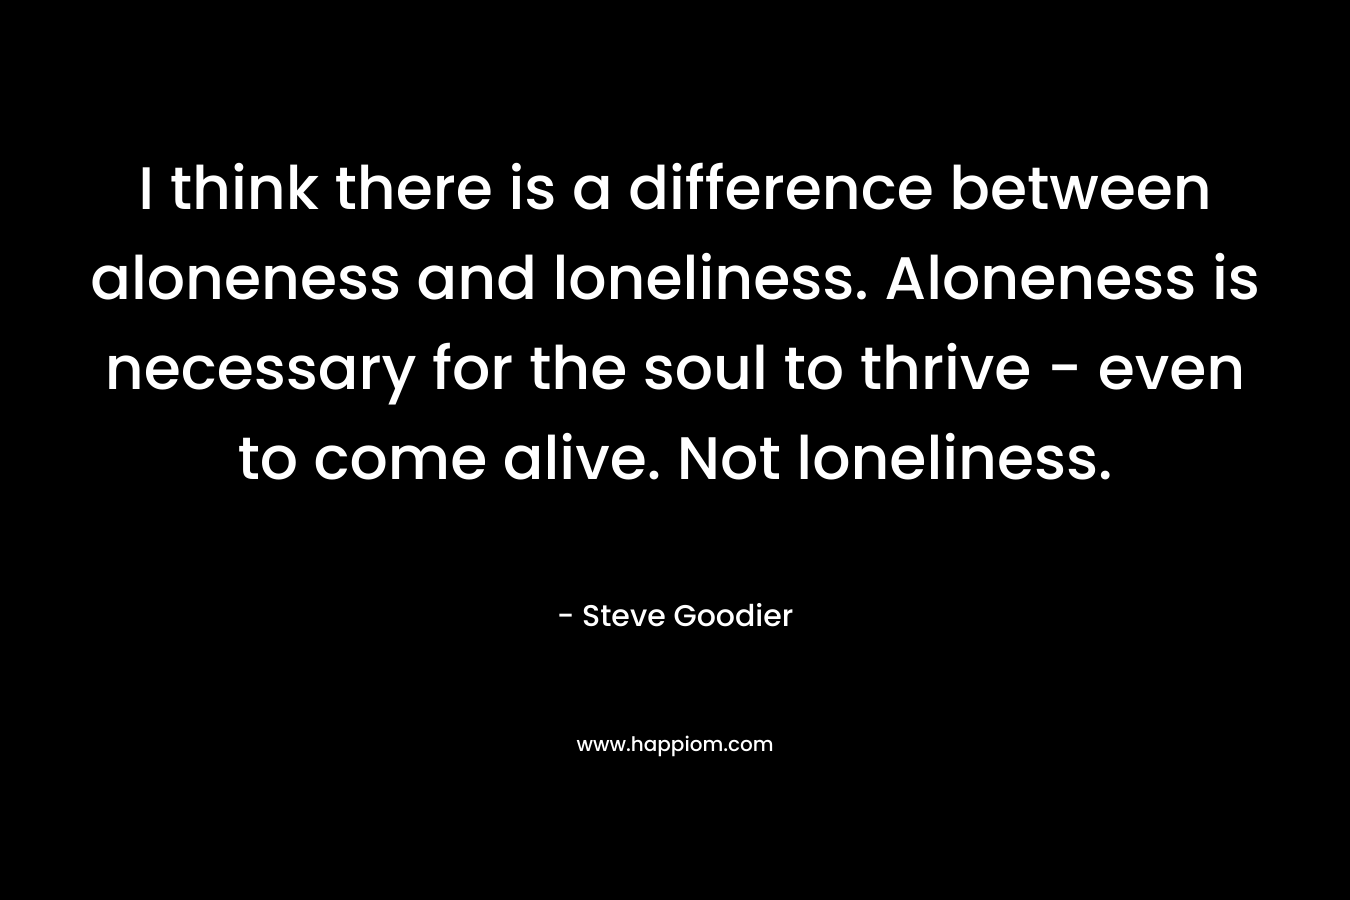 I think there is a difference between aloneness and loneliness. Aloneness is necessary for the soul to thrive - even to come alive. Not loneliness.